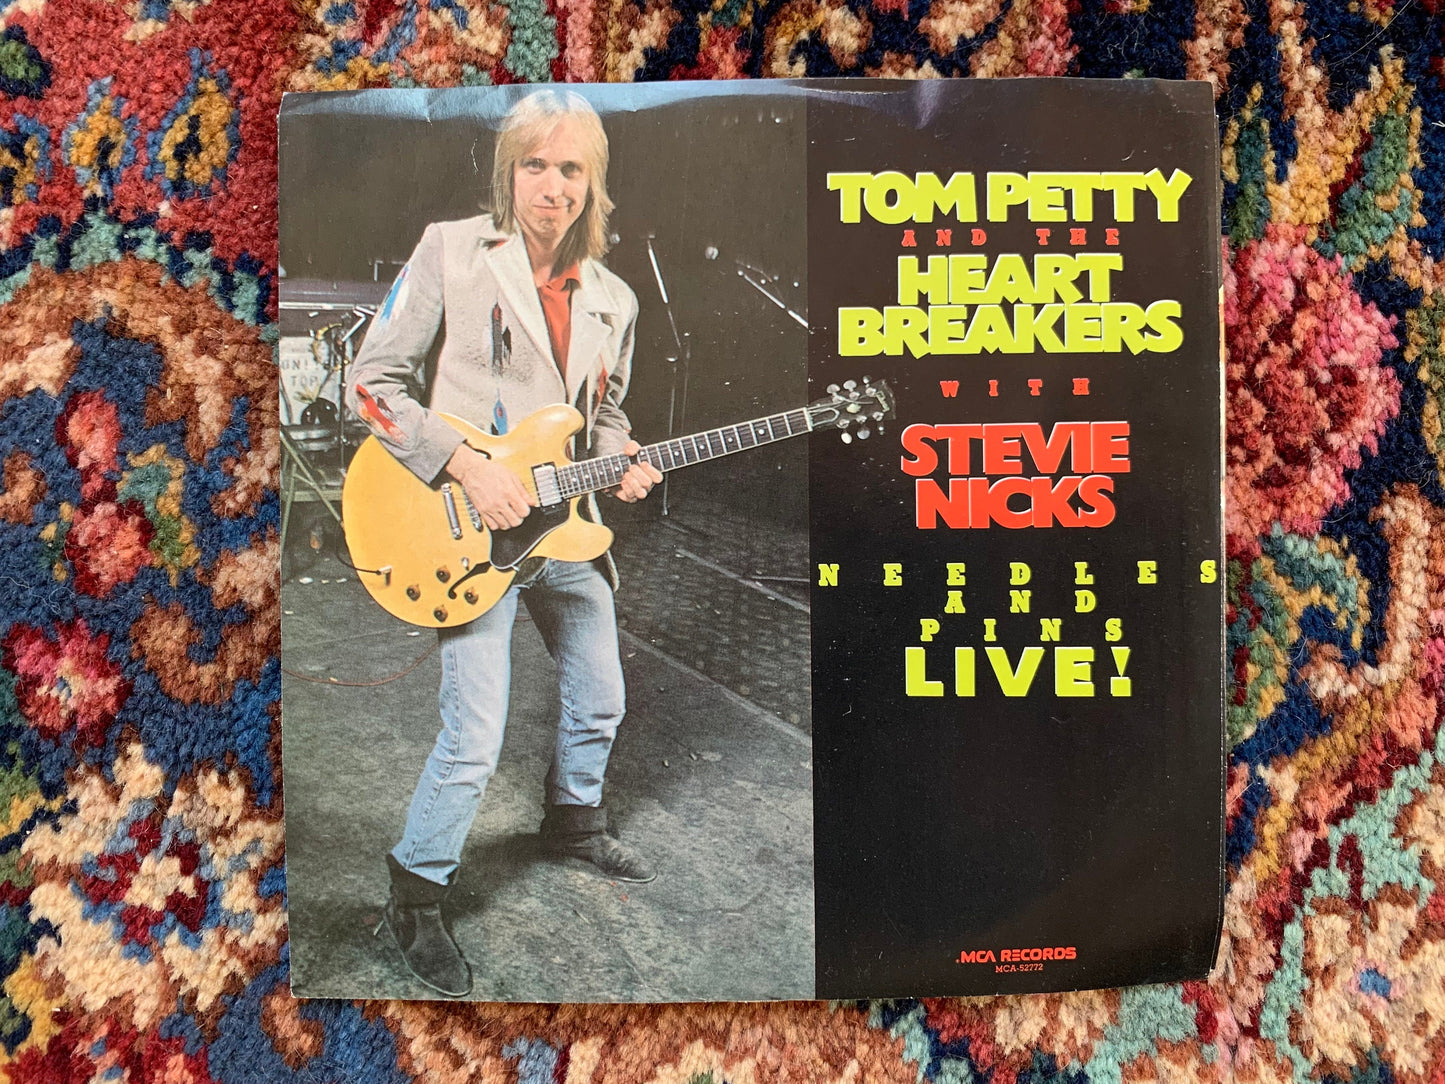 Tom Petty and the Heartbreakers with Stevie Nicks Needles And Pins (Live!), Spike MCA52772 Records 1986 Vintage Vinyl Records 80's Tom Petty